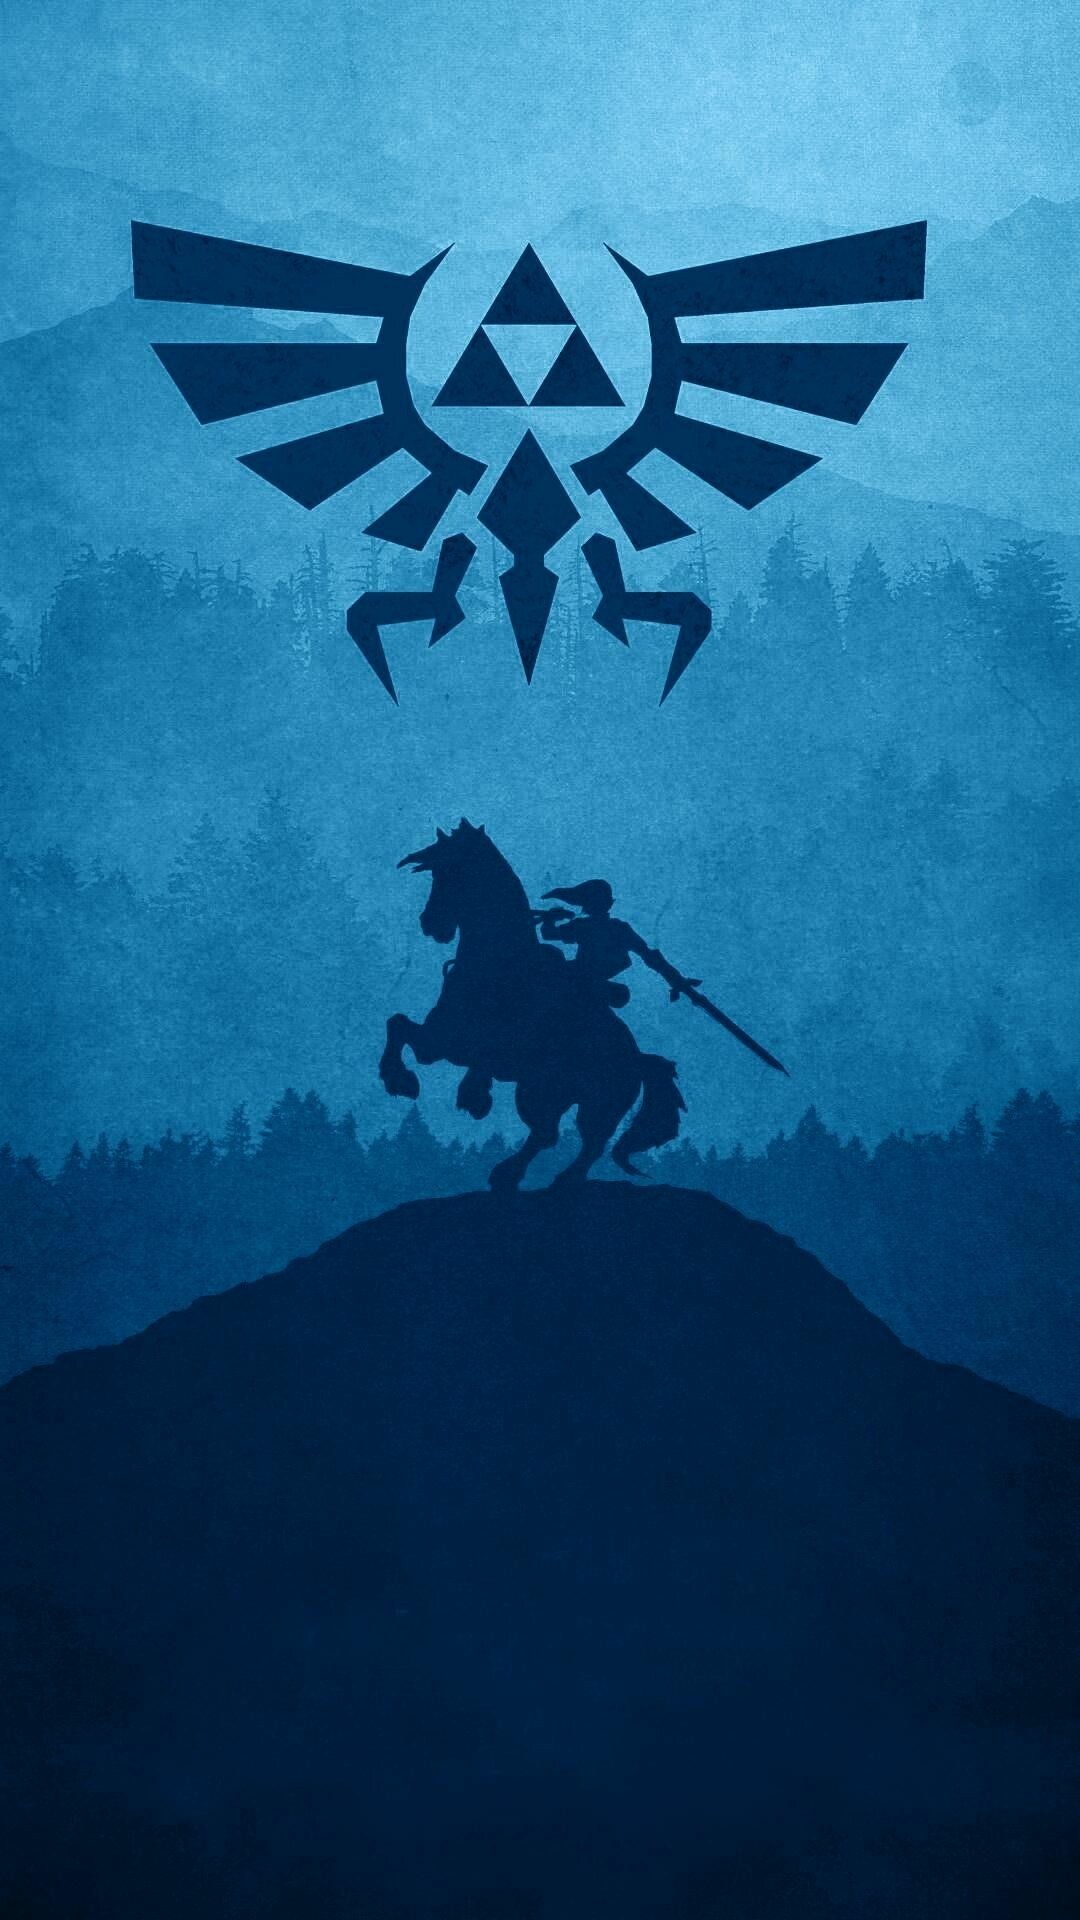 The Legend of Zelda: Video game series developed and published by Nintendo. 1080x1920 Full HD Background.